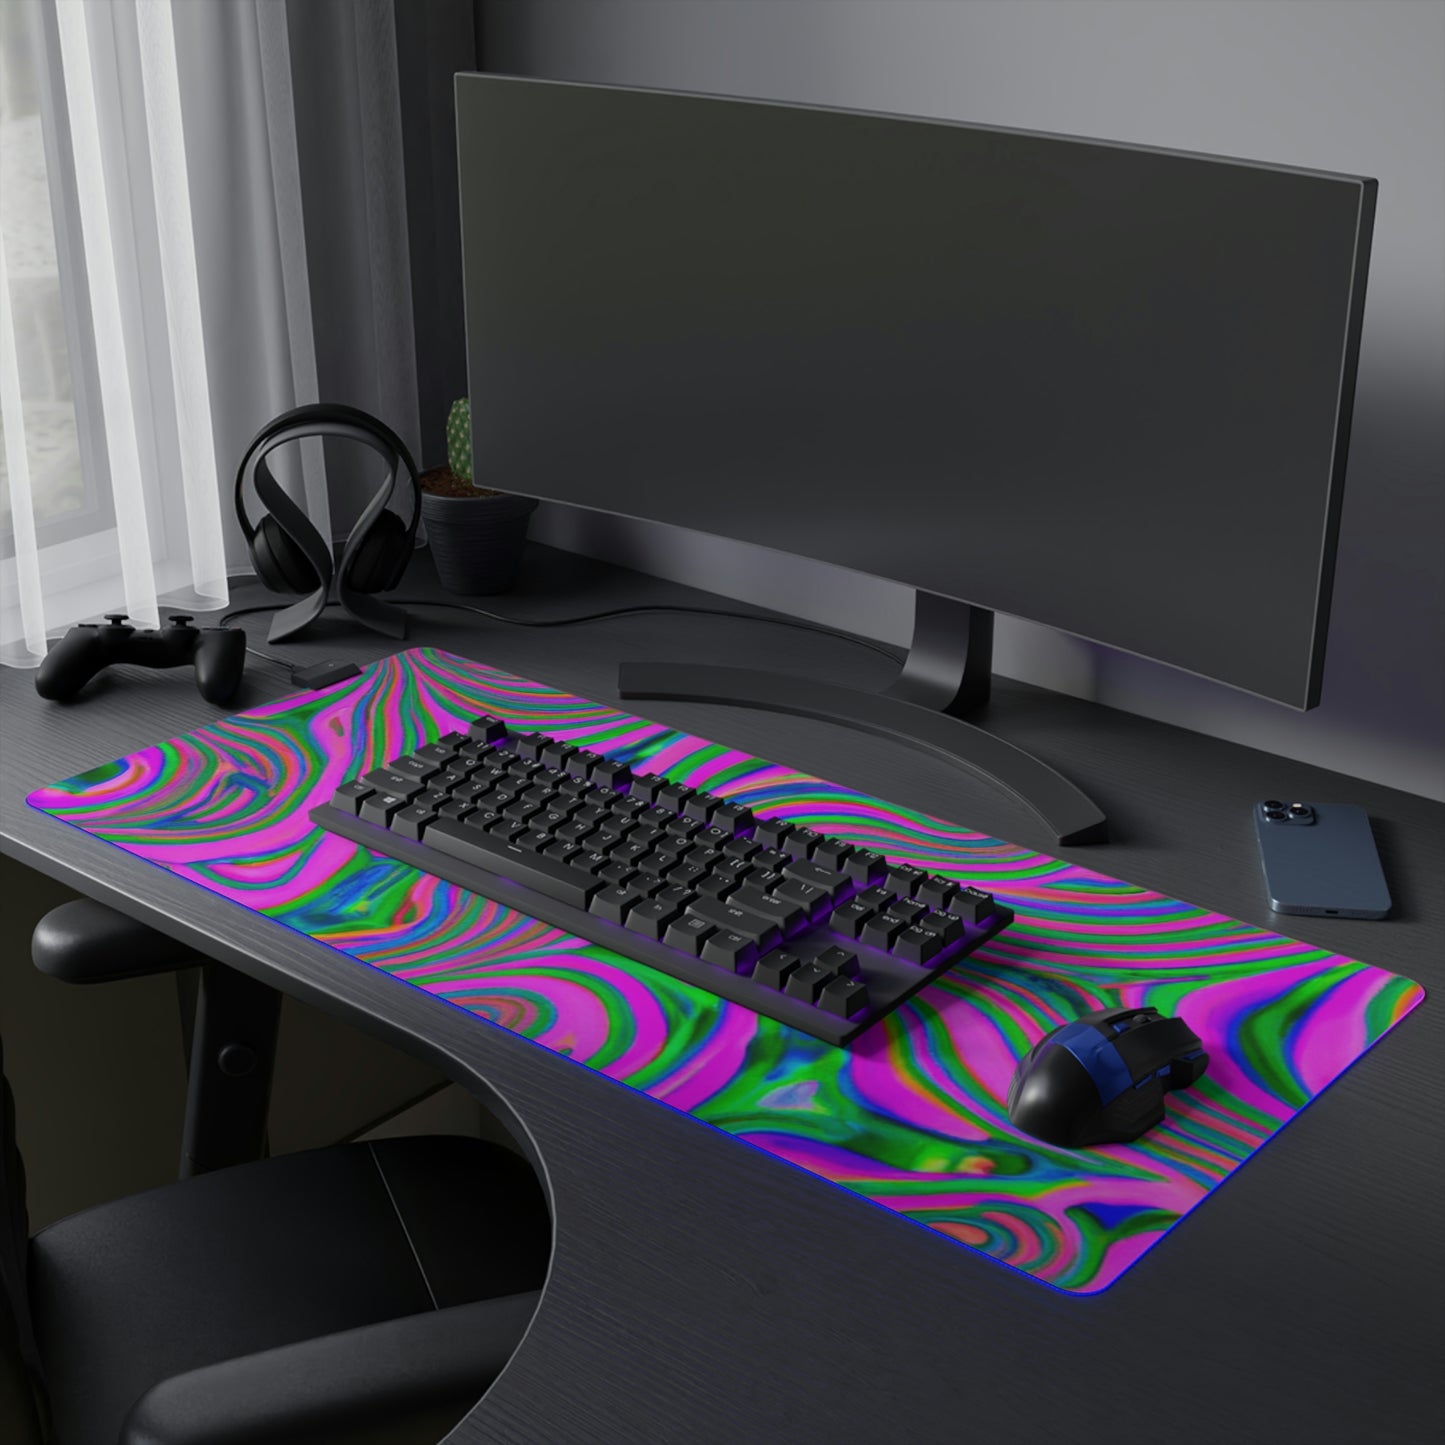 Bipsy Simms - Psychedelic Trippy LED Light Up Gaming Mouse Pad